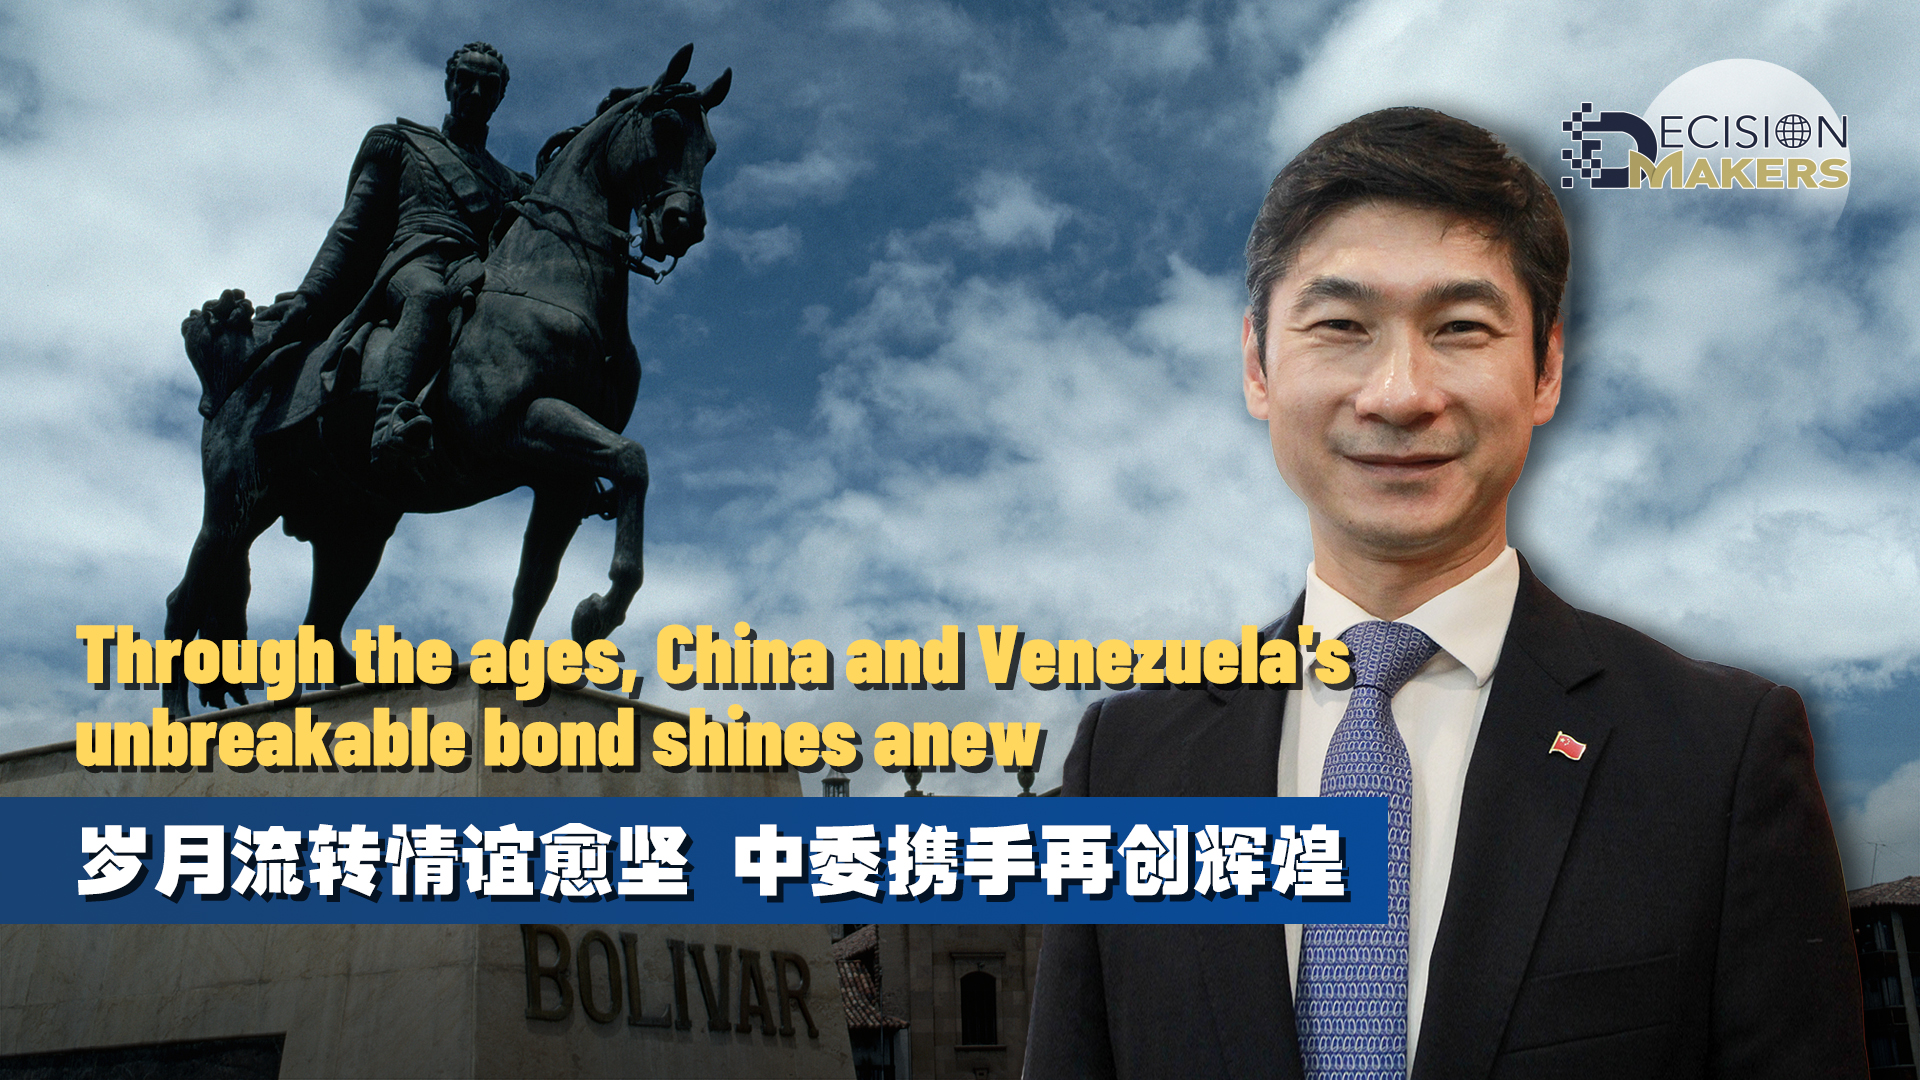 Through the ages, China and Venezuela's unbreakable bond shines anew